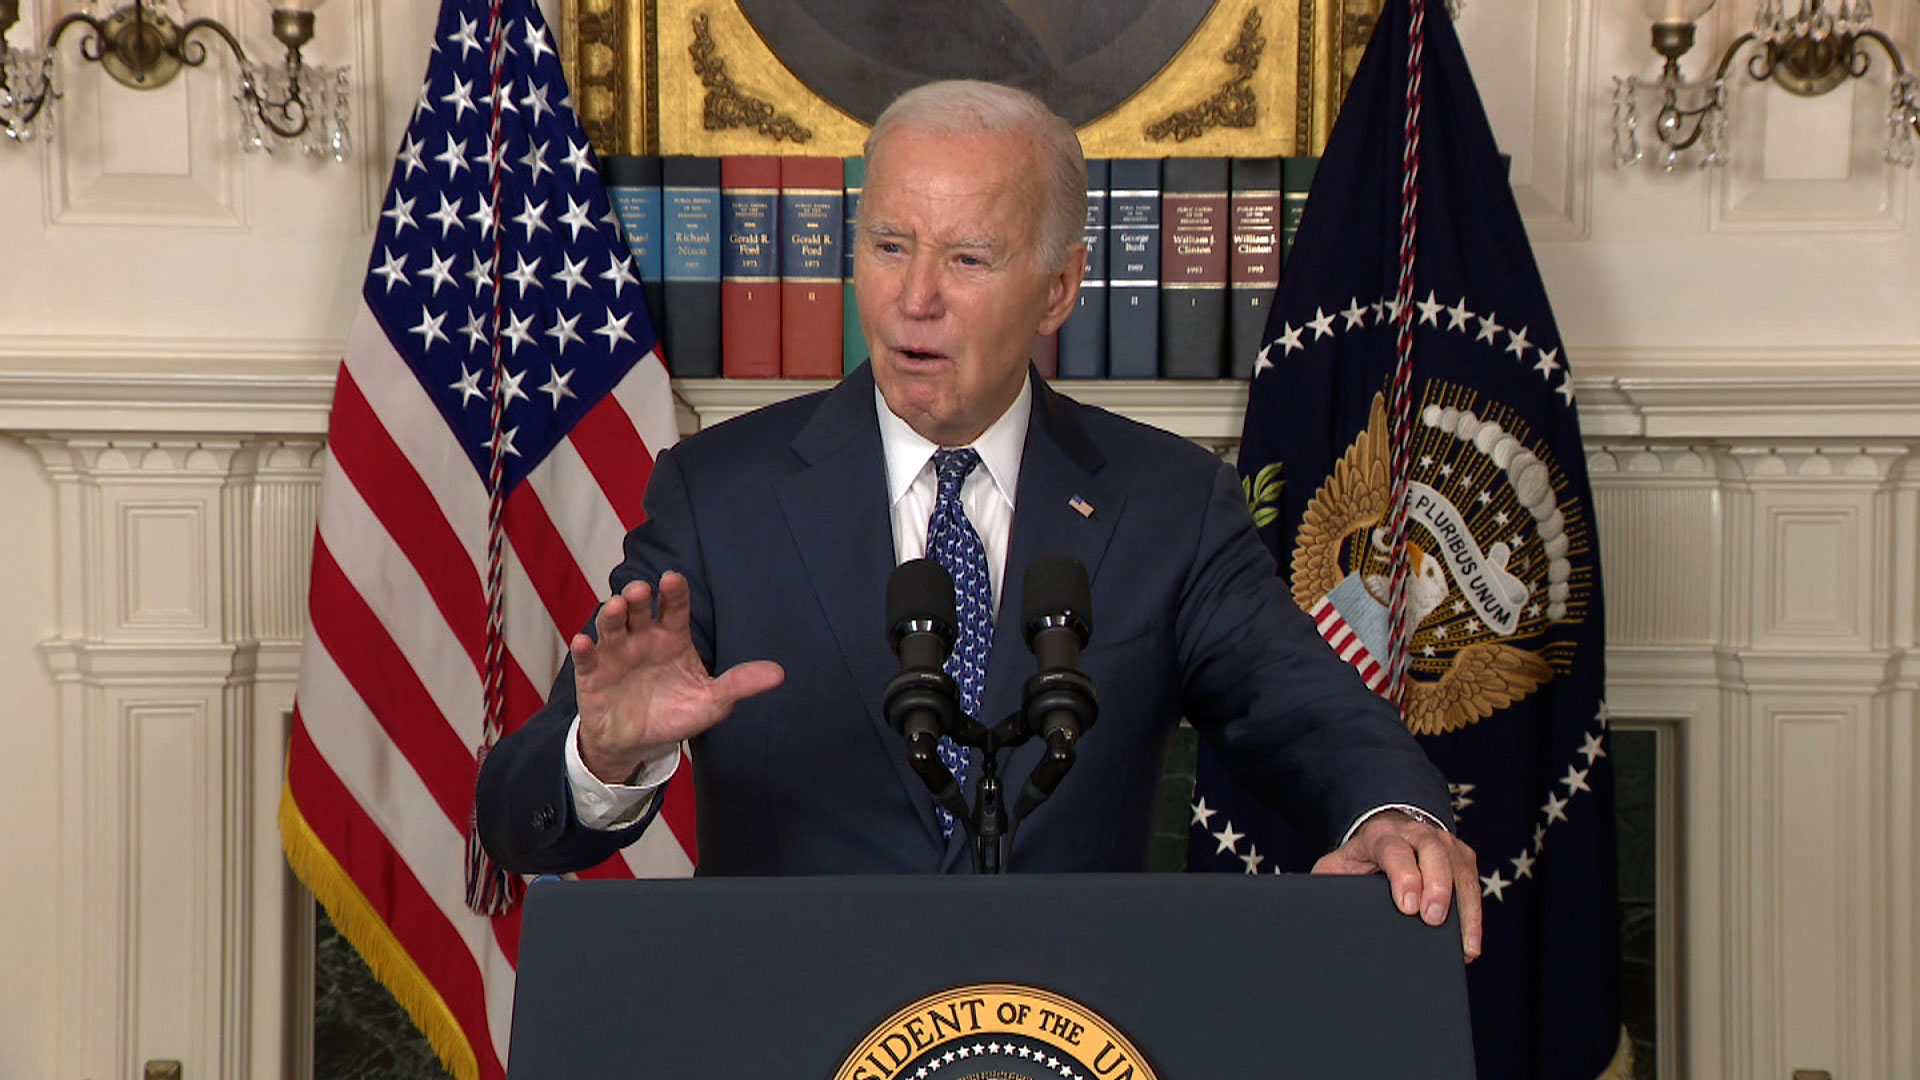 Special counsel clears Biden of charges but raises questions about document handling